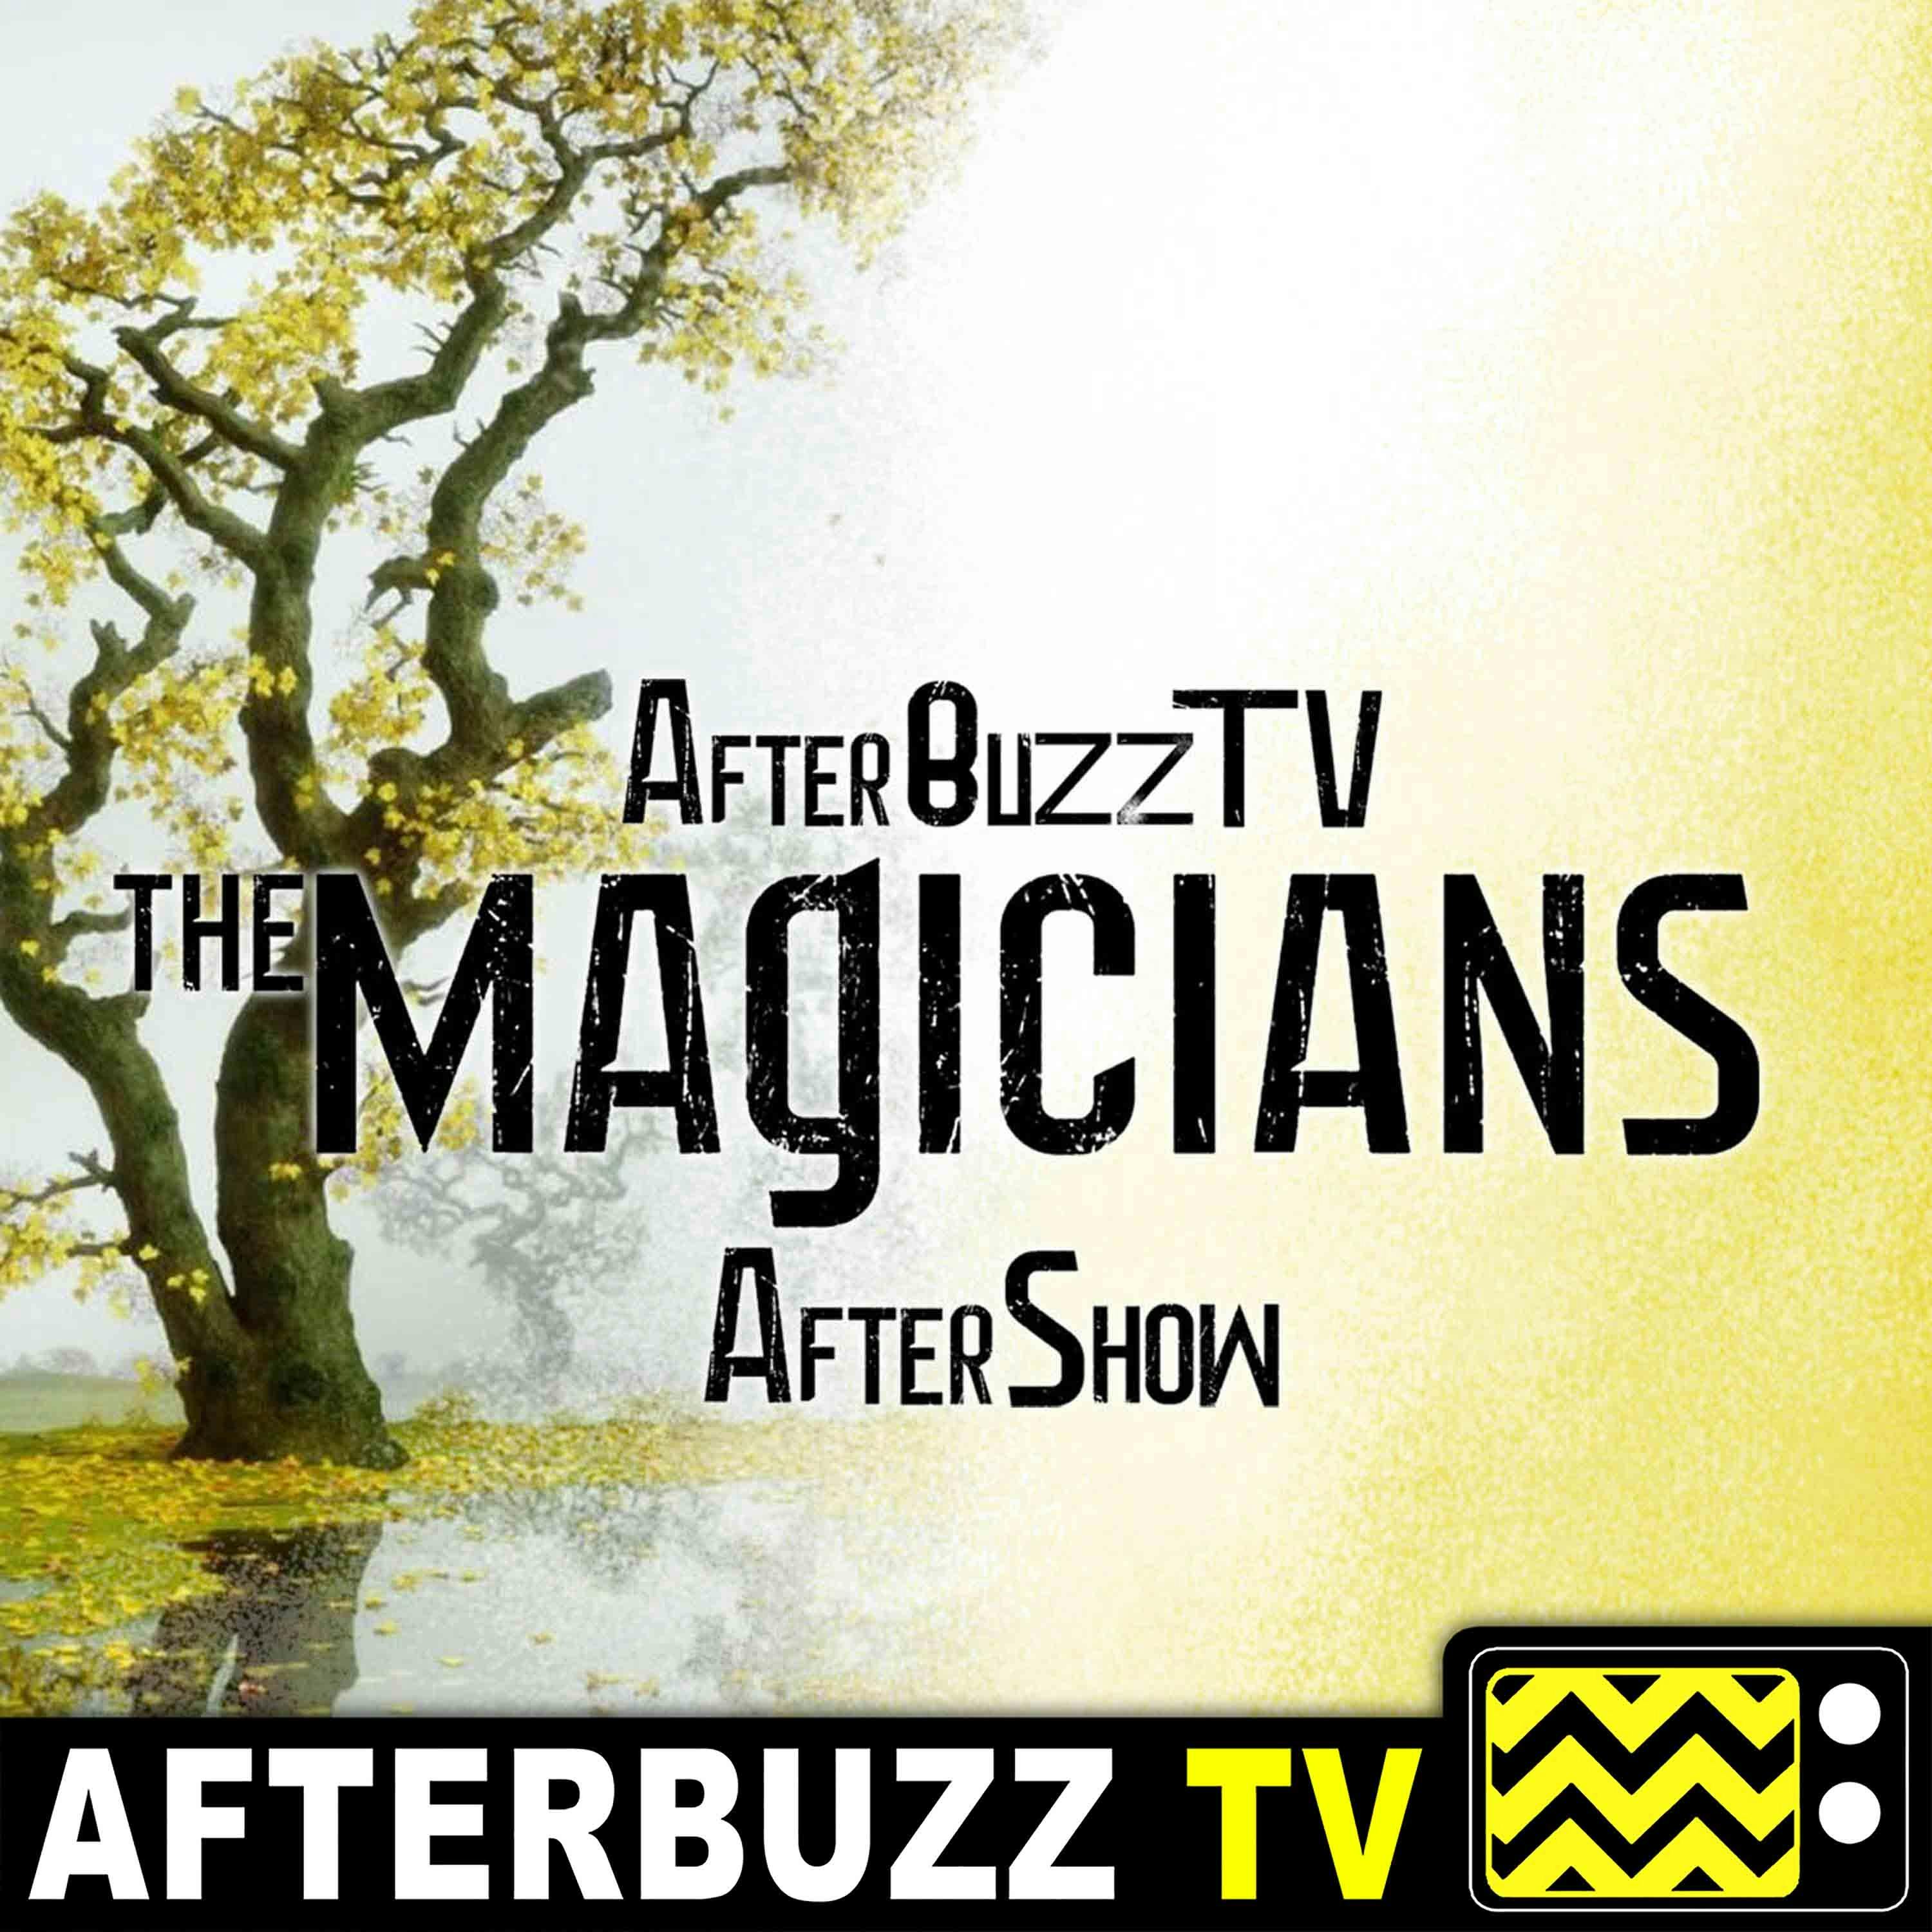 The Magicians S:2 | Elie Smolkin guests on Word as Bond B E:8 | AfterBuzz TV AfterShow